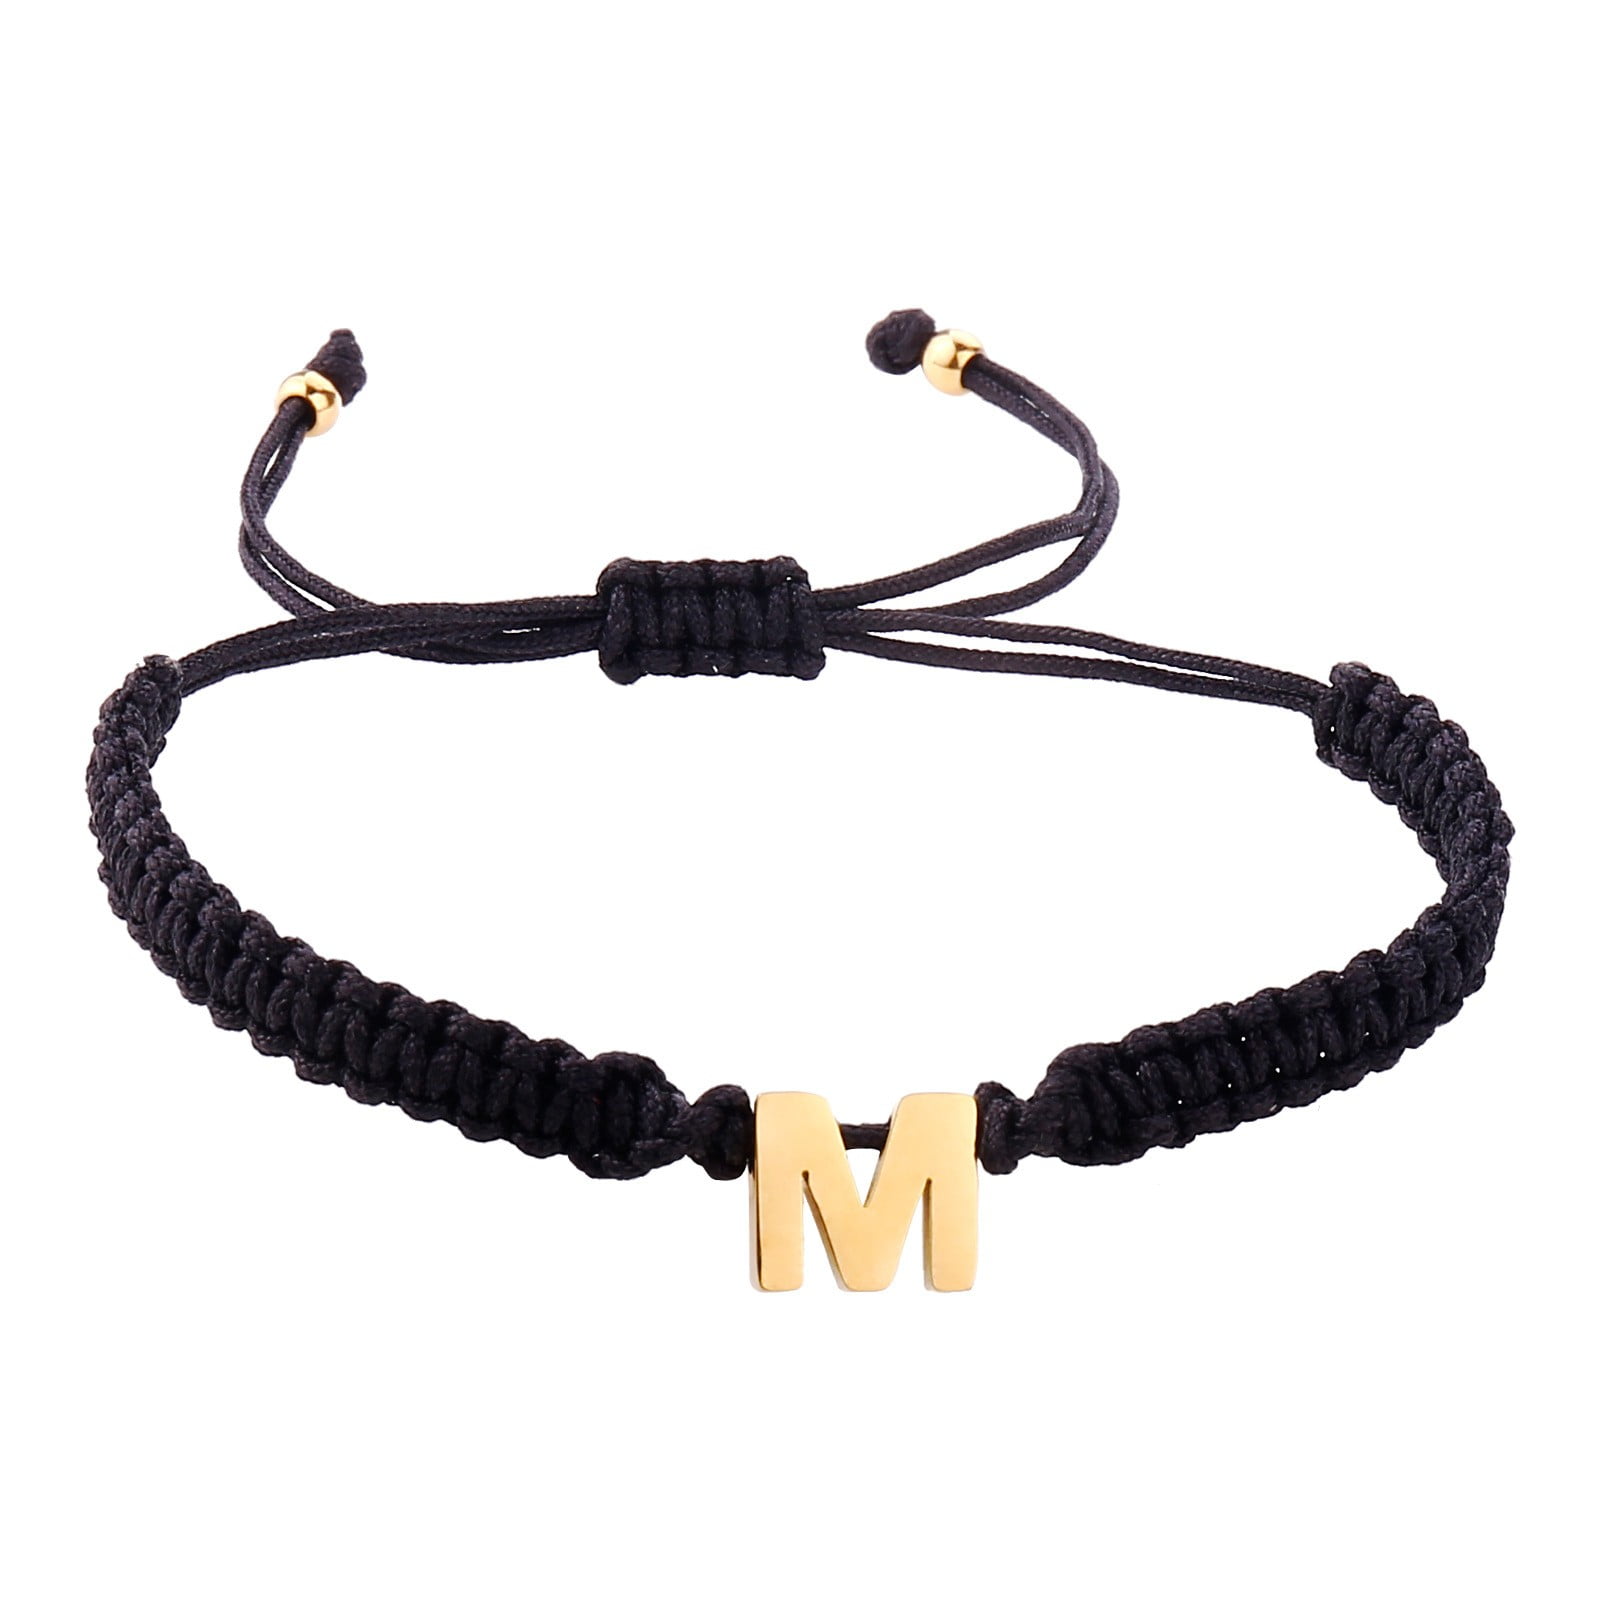 XIAQUJ Personalized 26 in itial Bracelet Gold Plated Letter Black